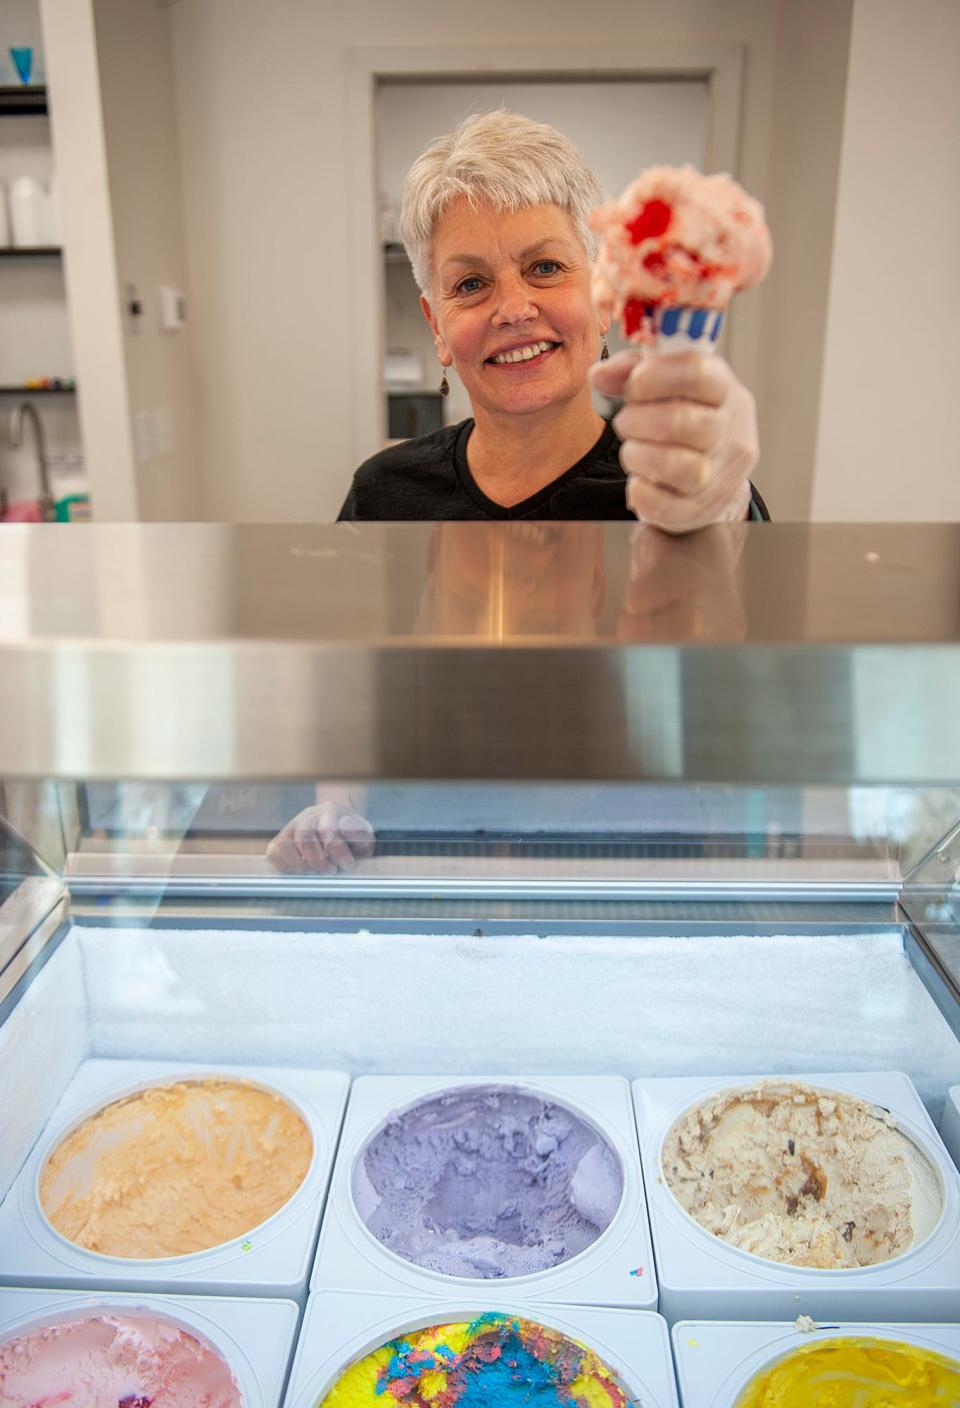 T.C. Scoops owner Tina Chemini shows off an ice cream cone inside her new store on Central Street in Holliston, April 19, 2023.